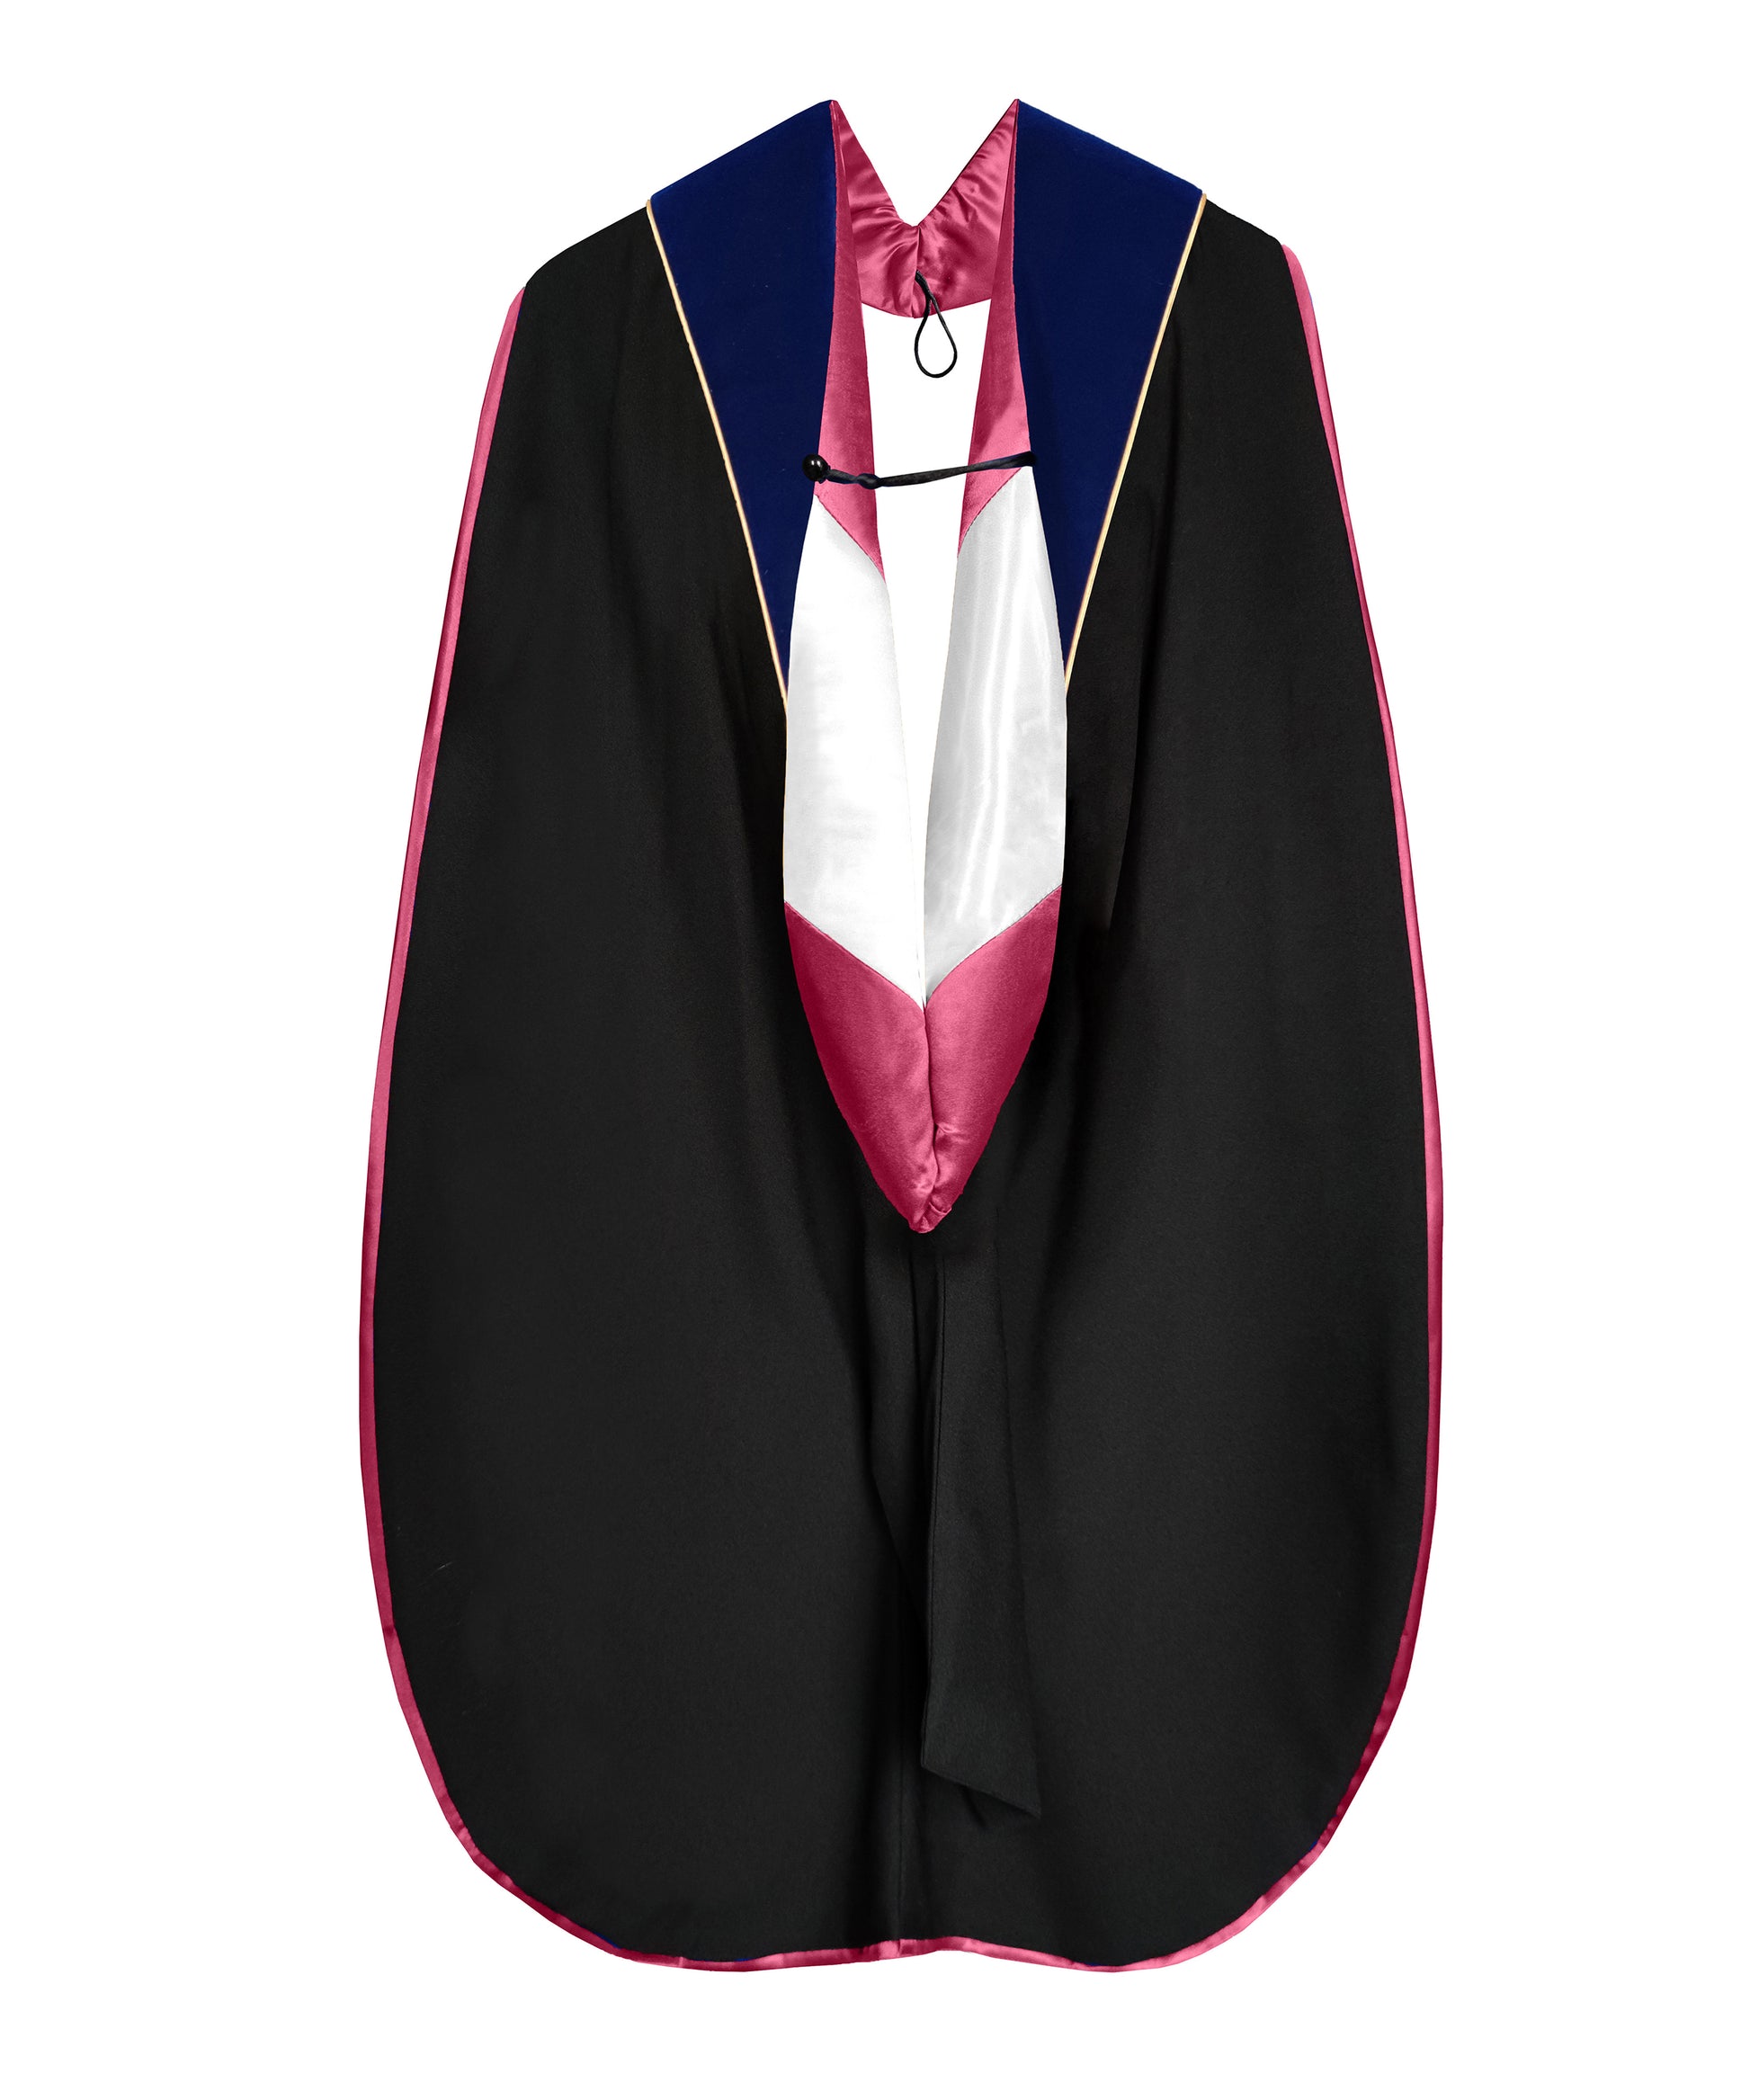 Deluxe Doctoral Graduation Hood for Various Degrees and Schools-CA graduation